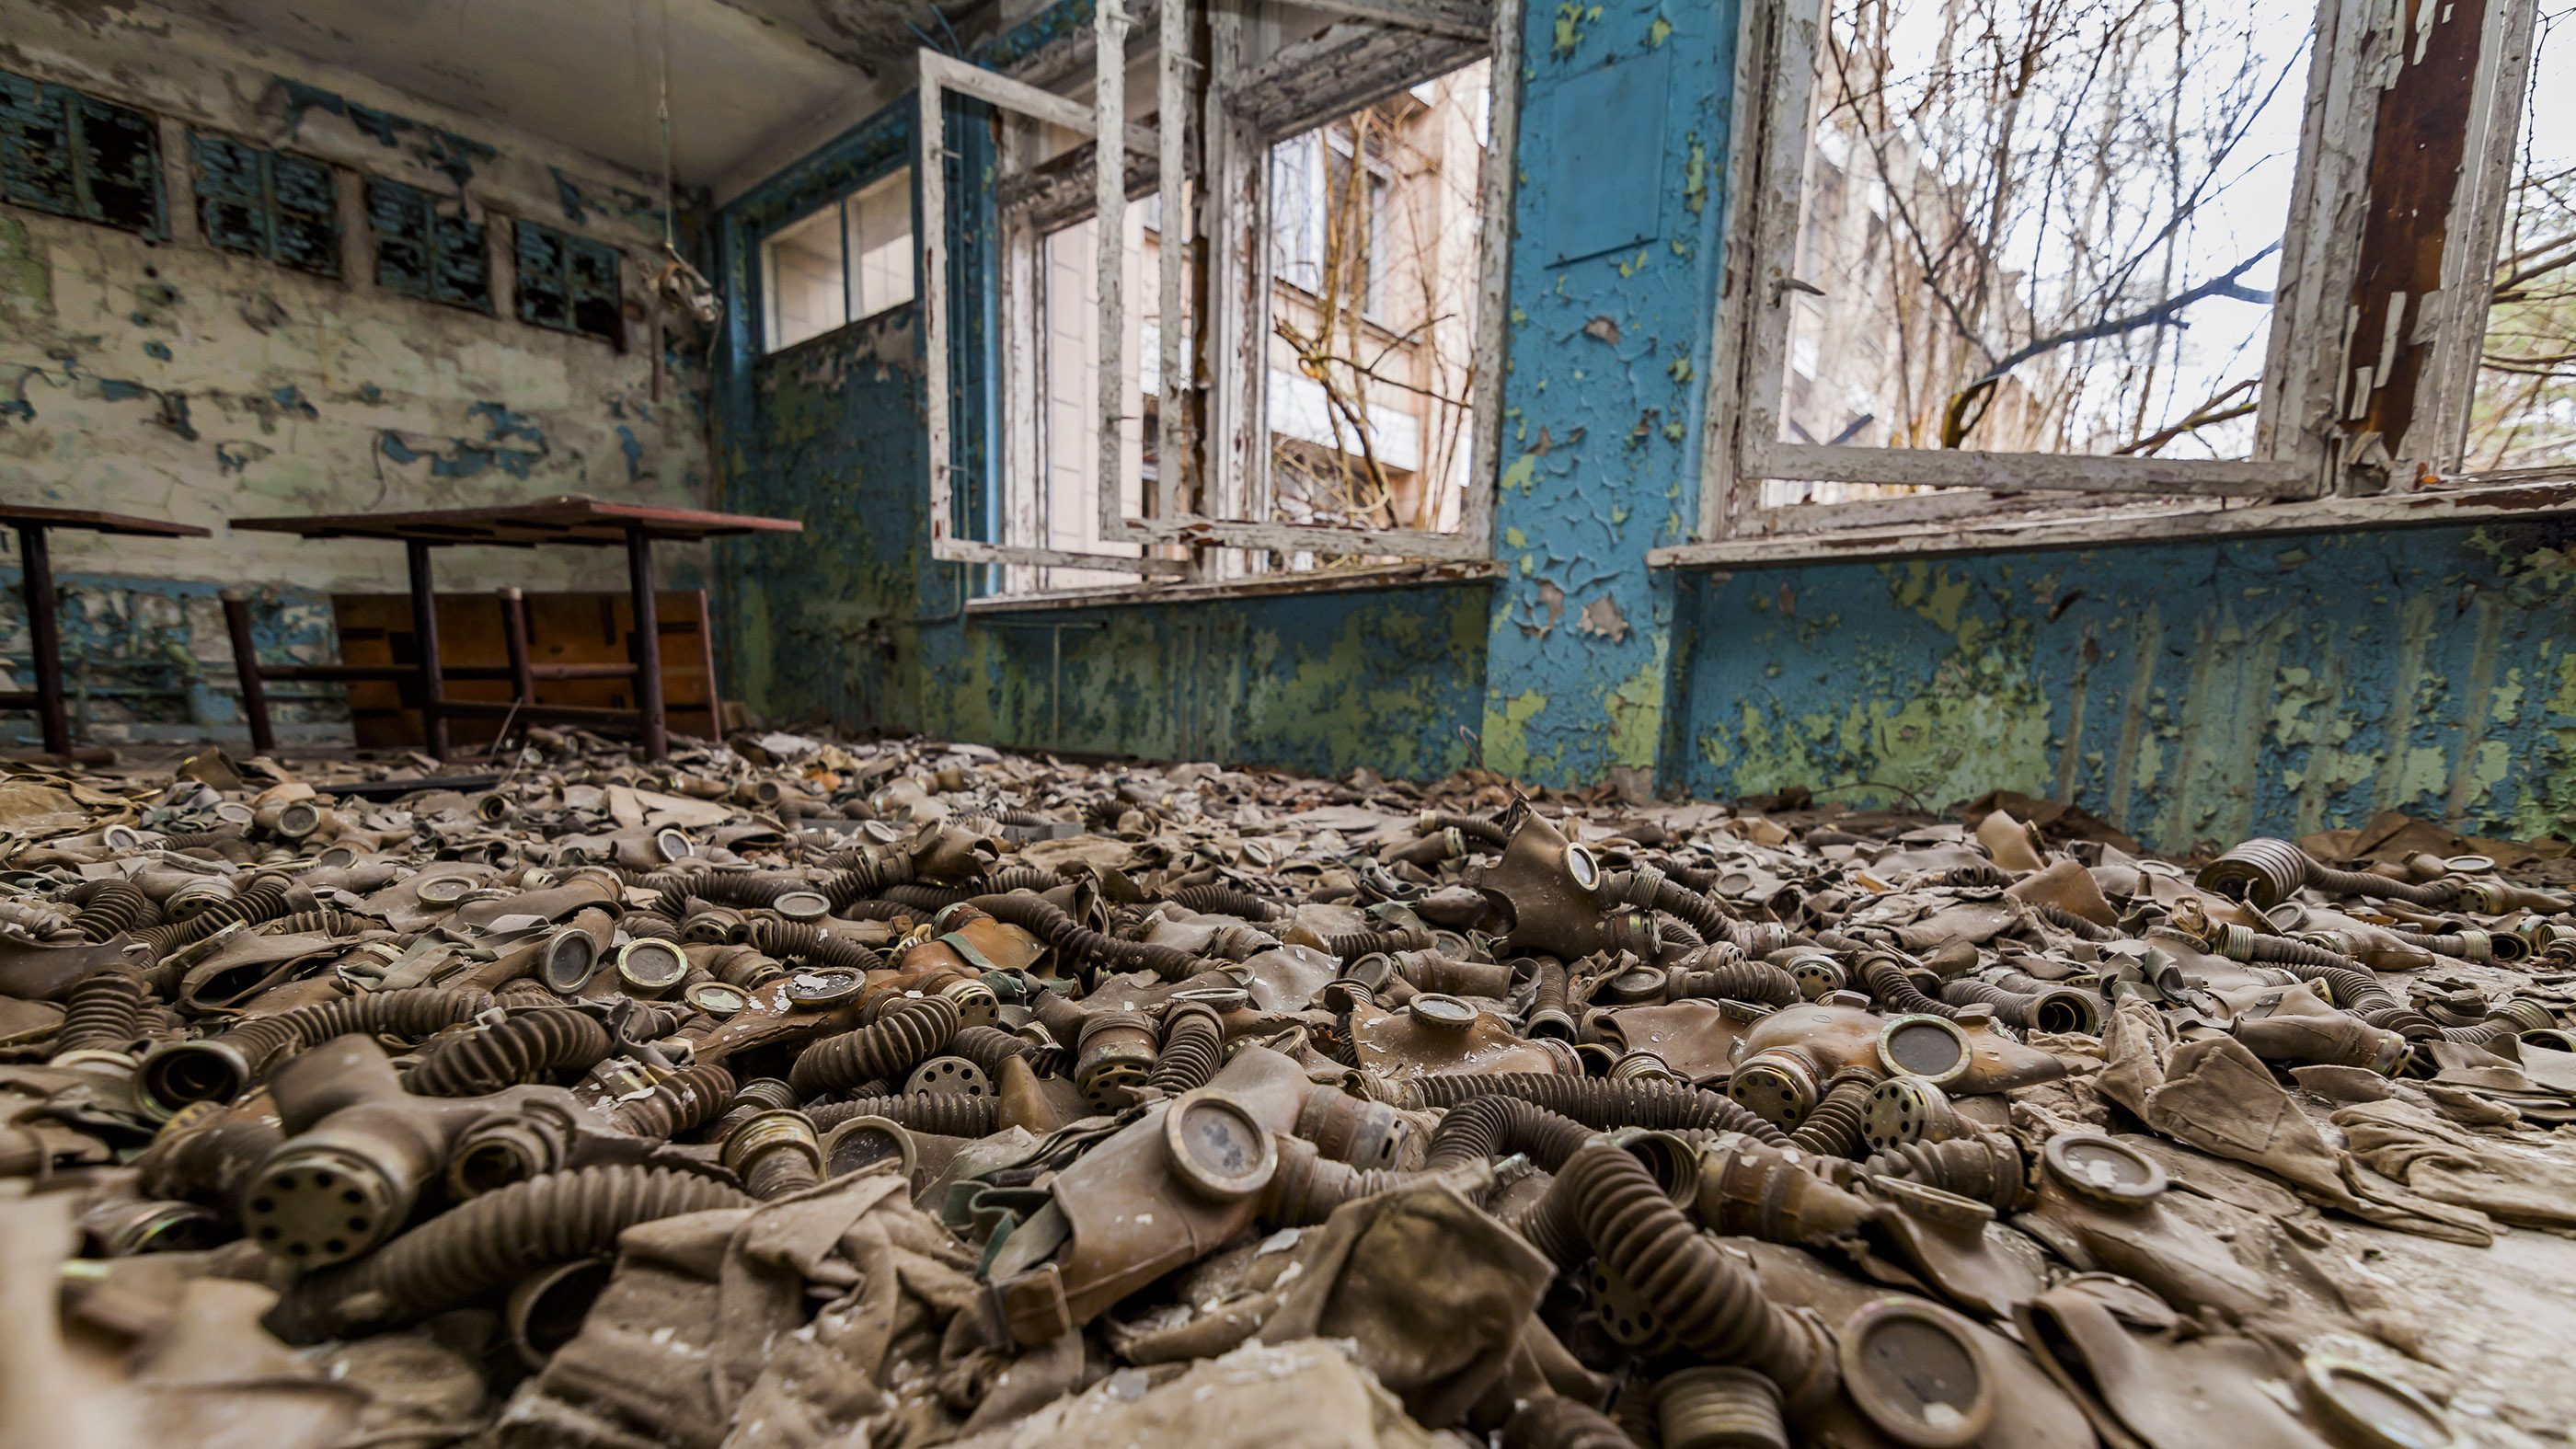 Here, an abandoned school in the city of Pripyat, Ukraine, the nearest town to the nuclear disaster at the Chernobyl power plant in 1986.